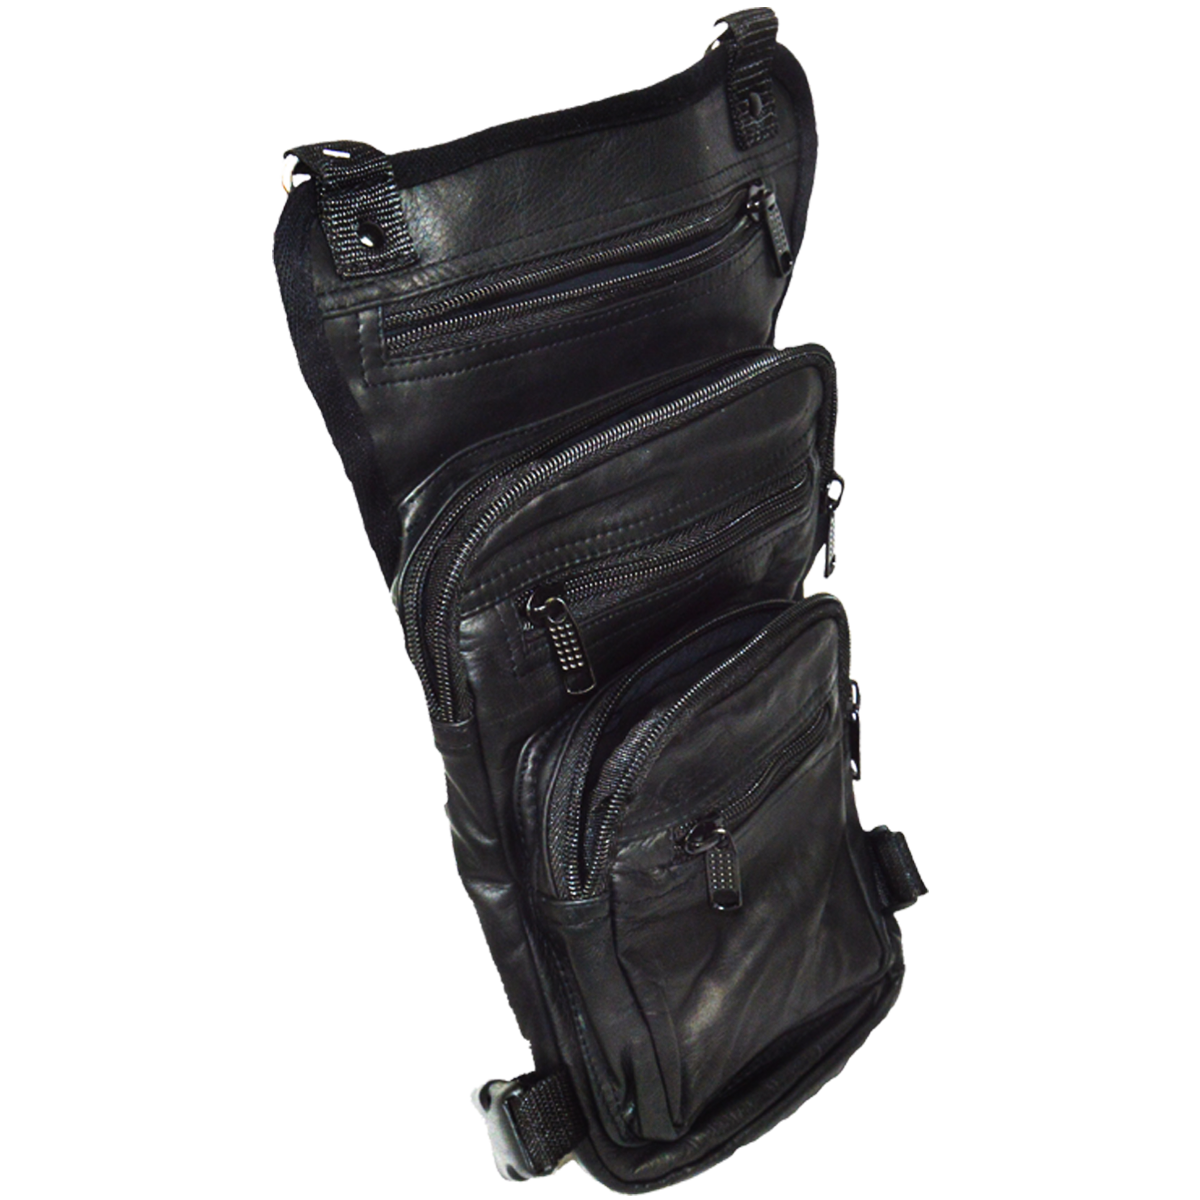 Vance Leather Motorcycle Drop Leg Fanny Pack Thigh Bag